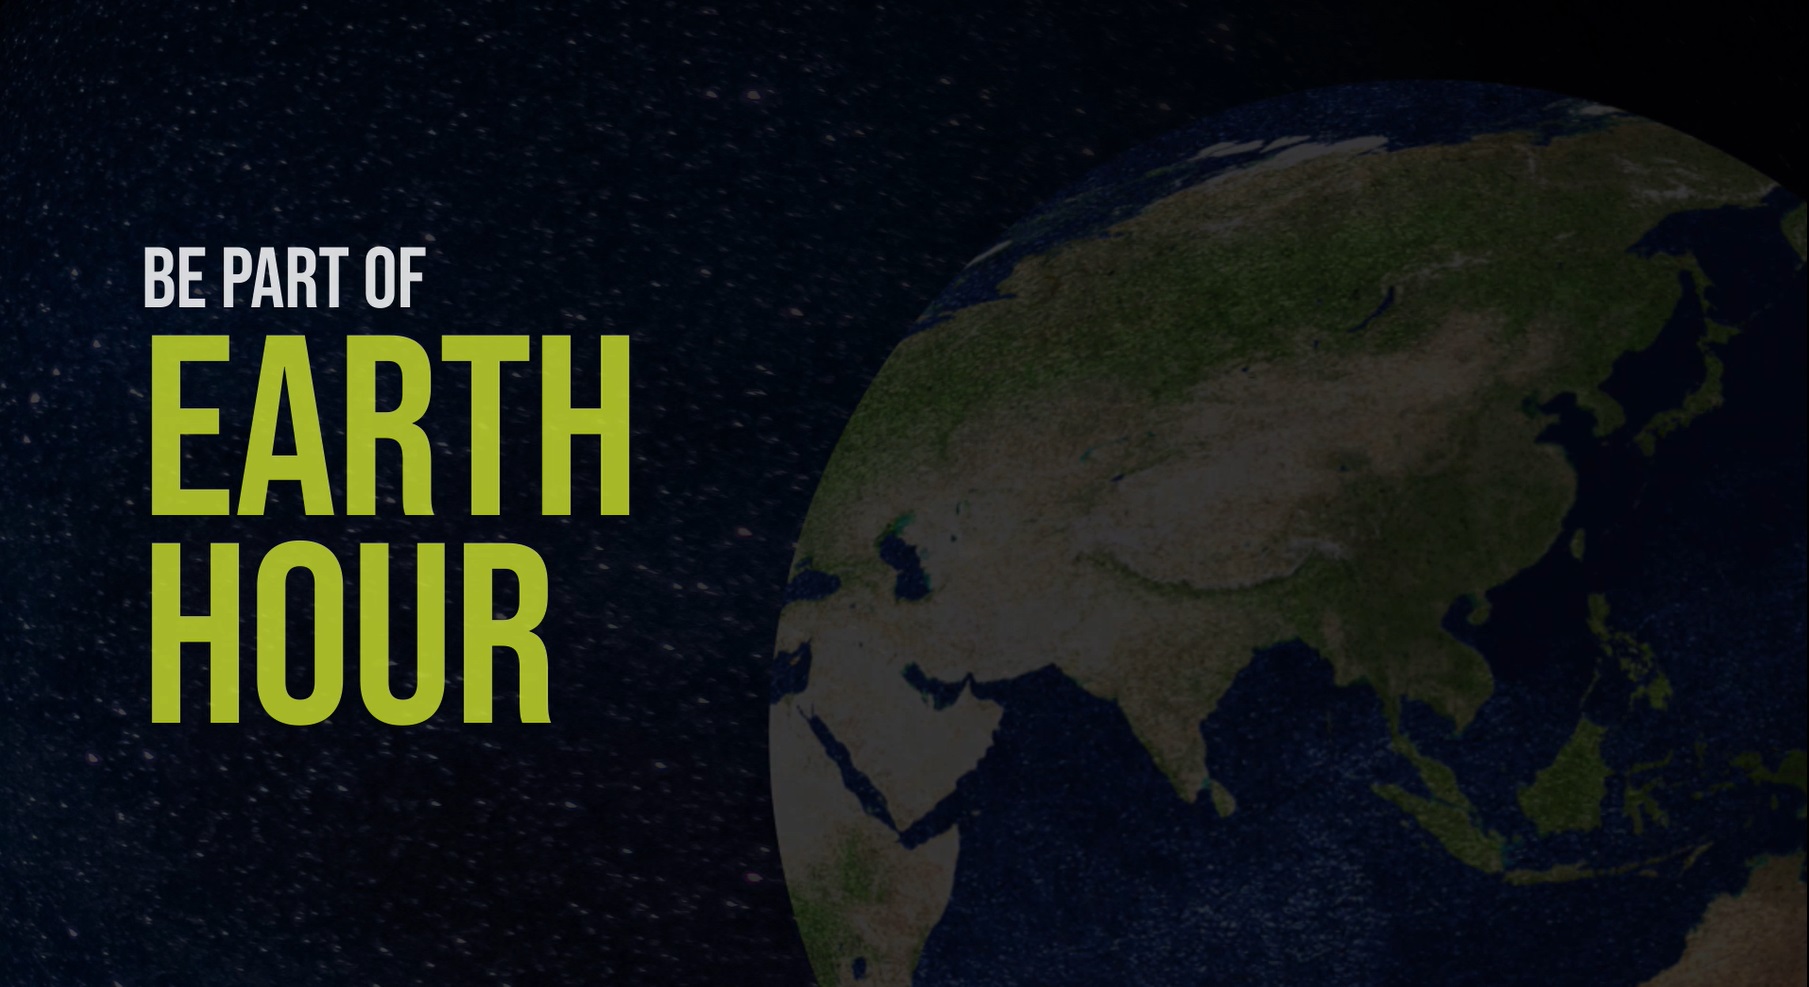 Be part of Earth Hour